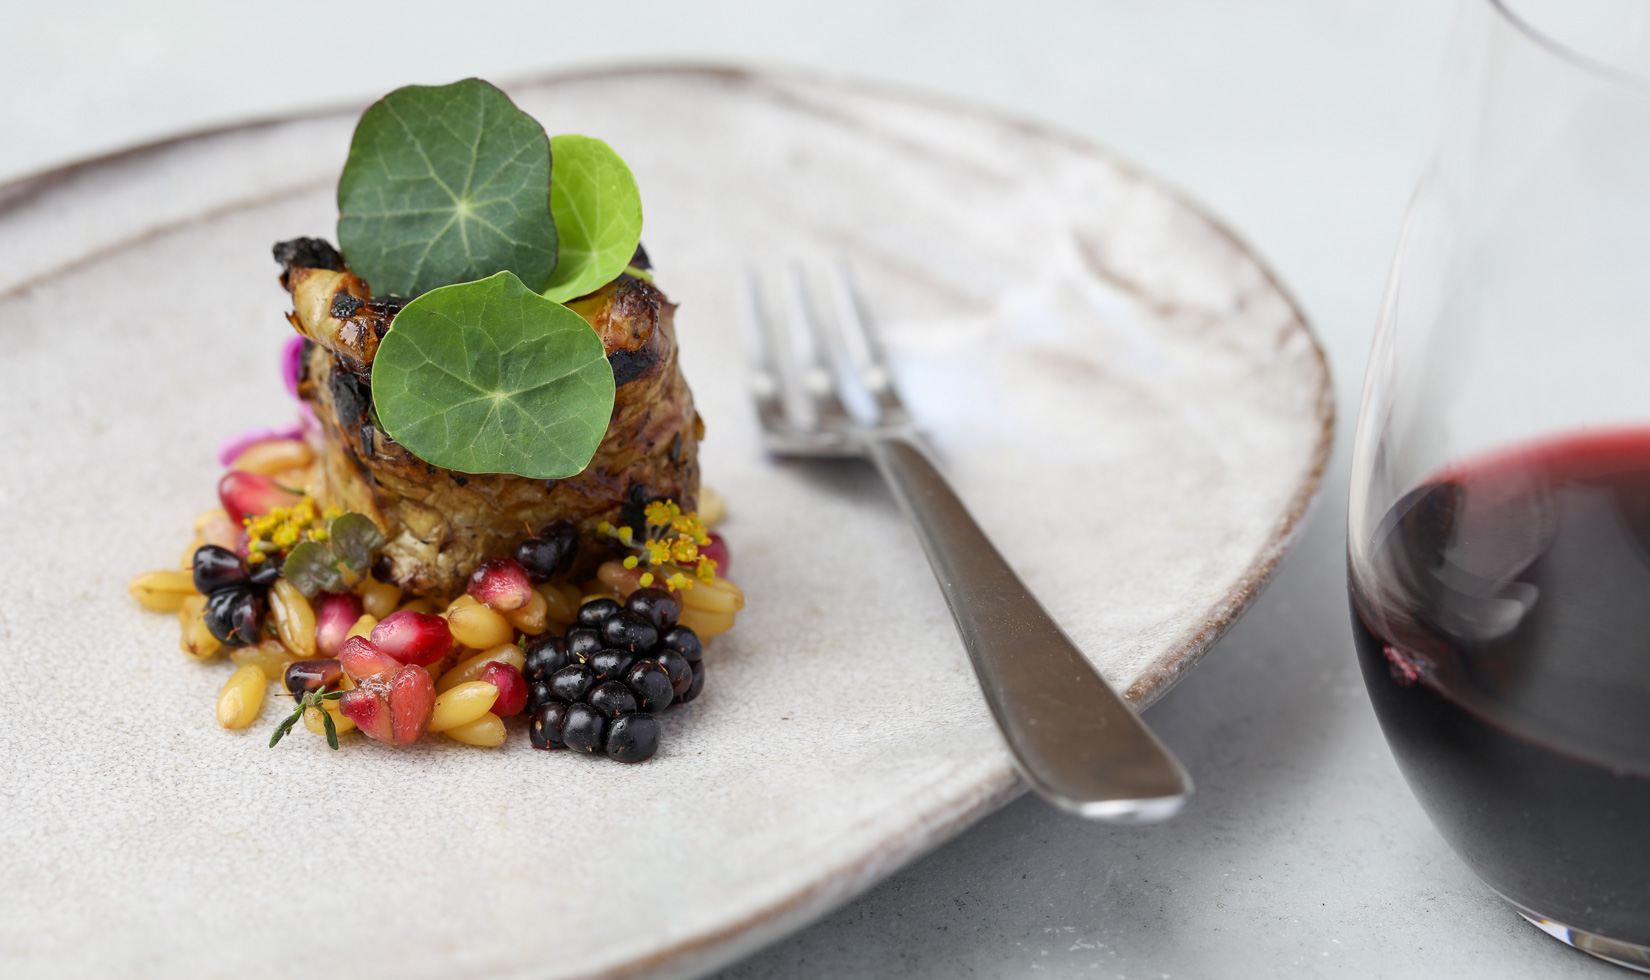 Grilled Sunchoke Recipe with Honey Fermented Pomegranate Seeds